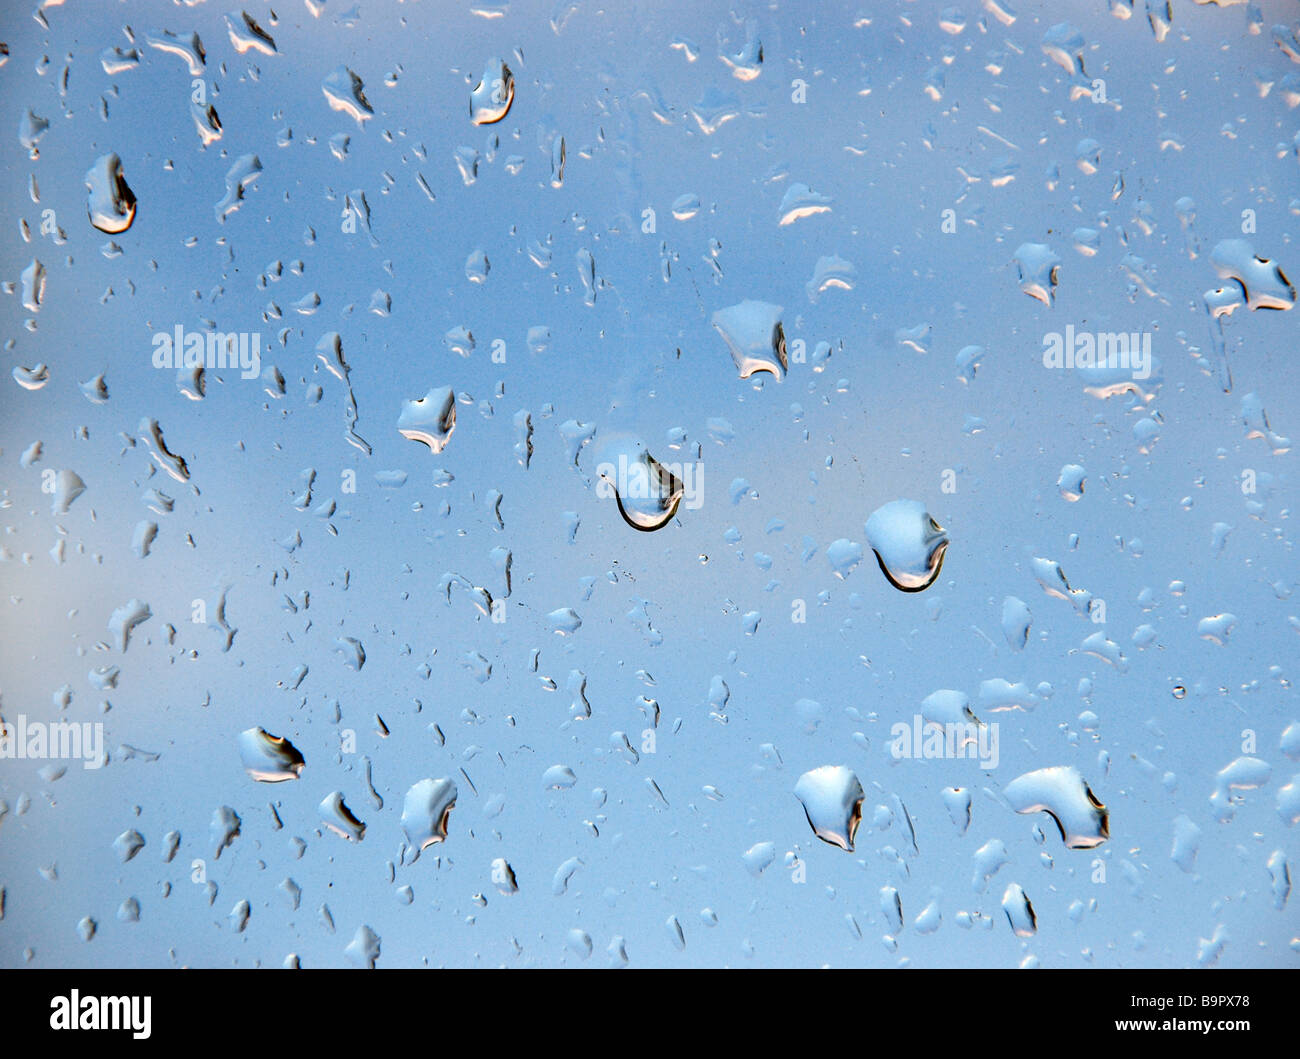 Rain drops on a window pane, looking out to a brightening sky. Stock Photo